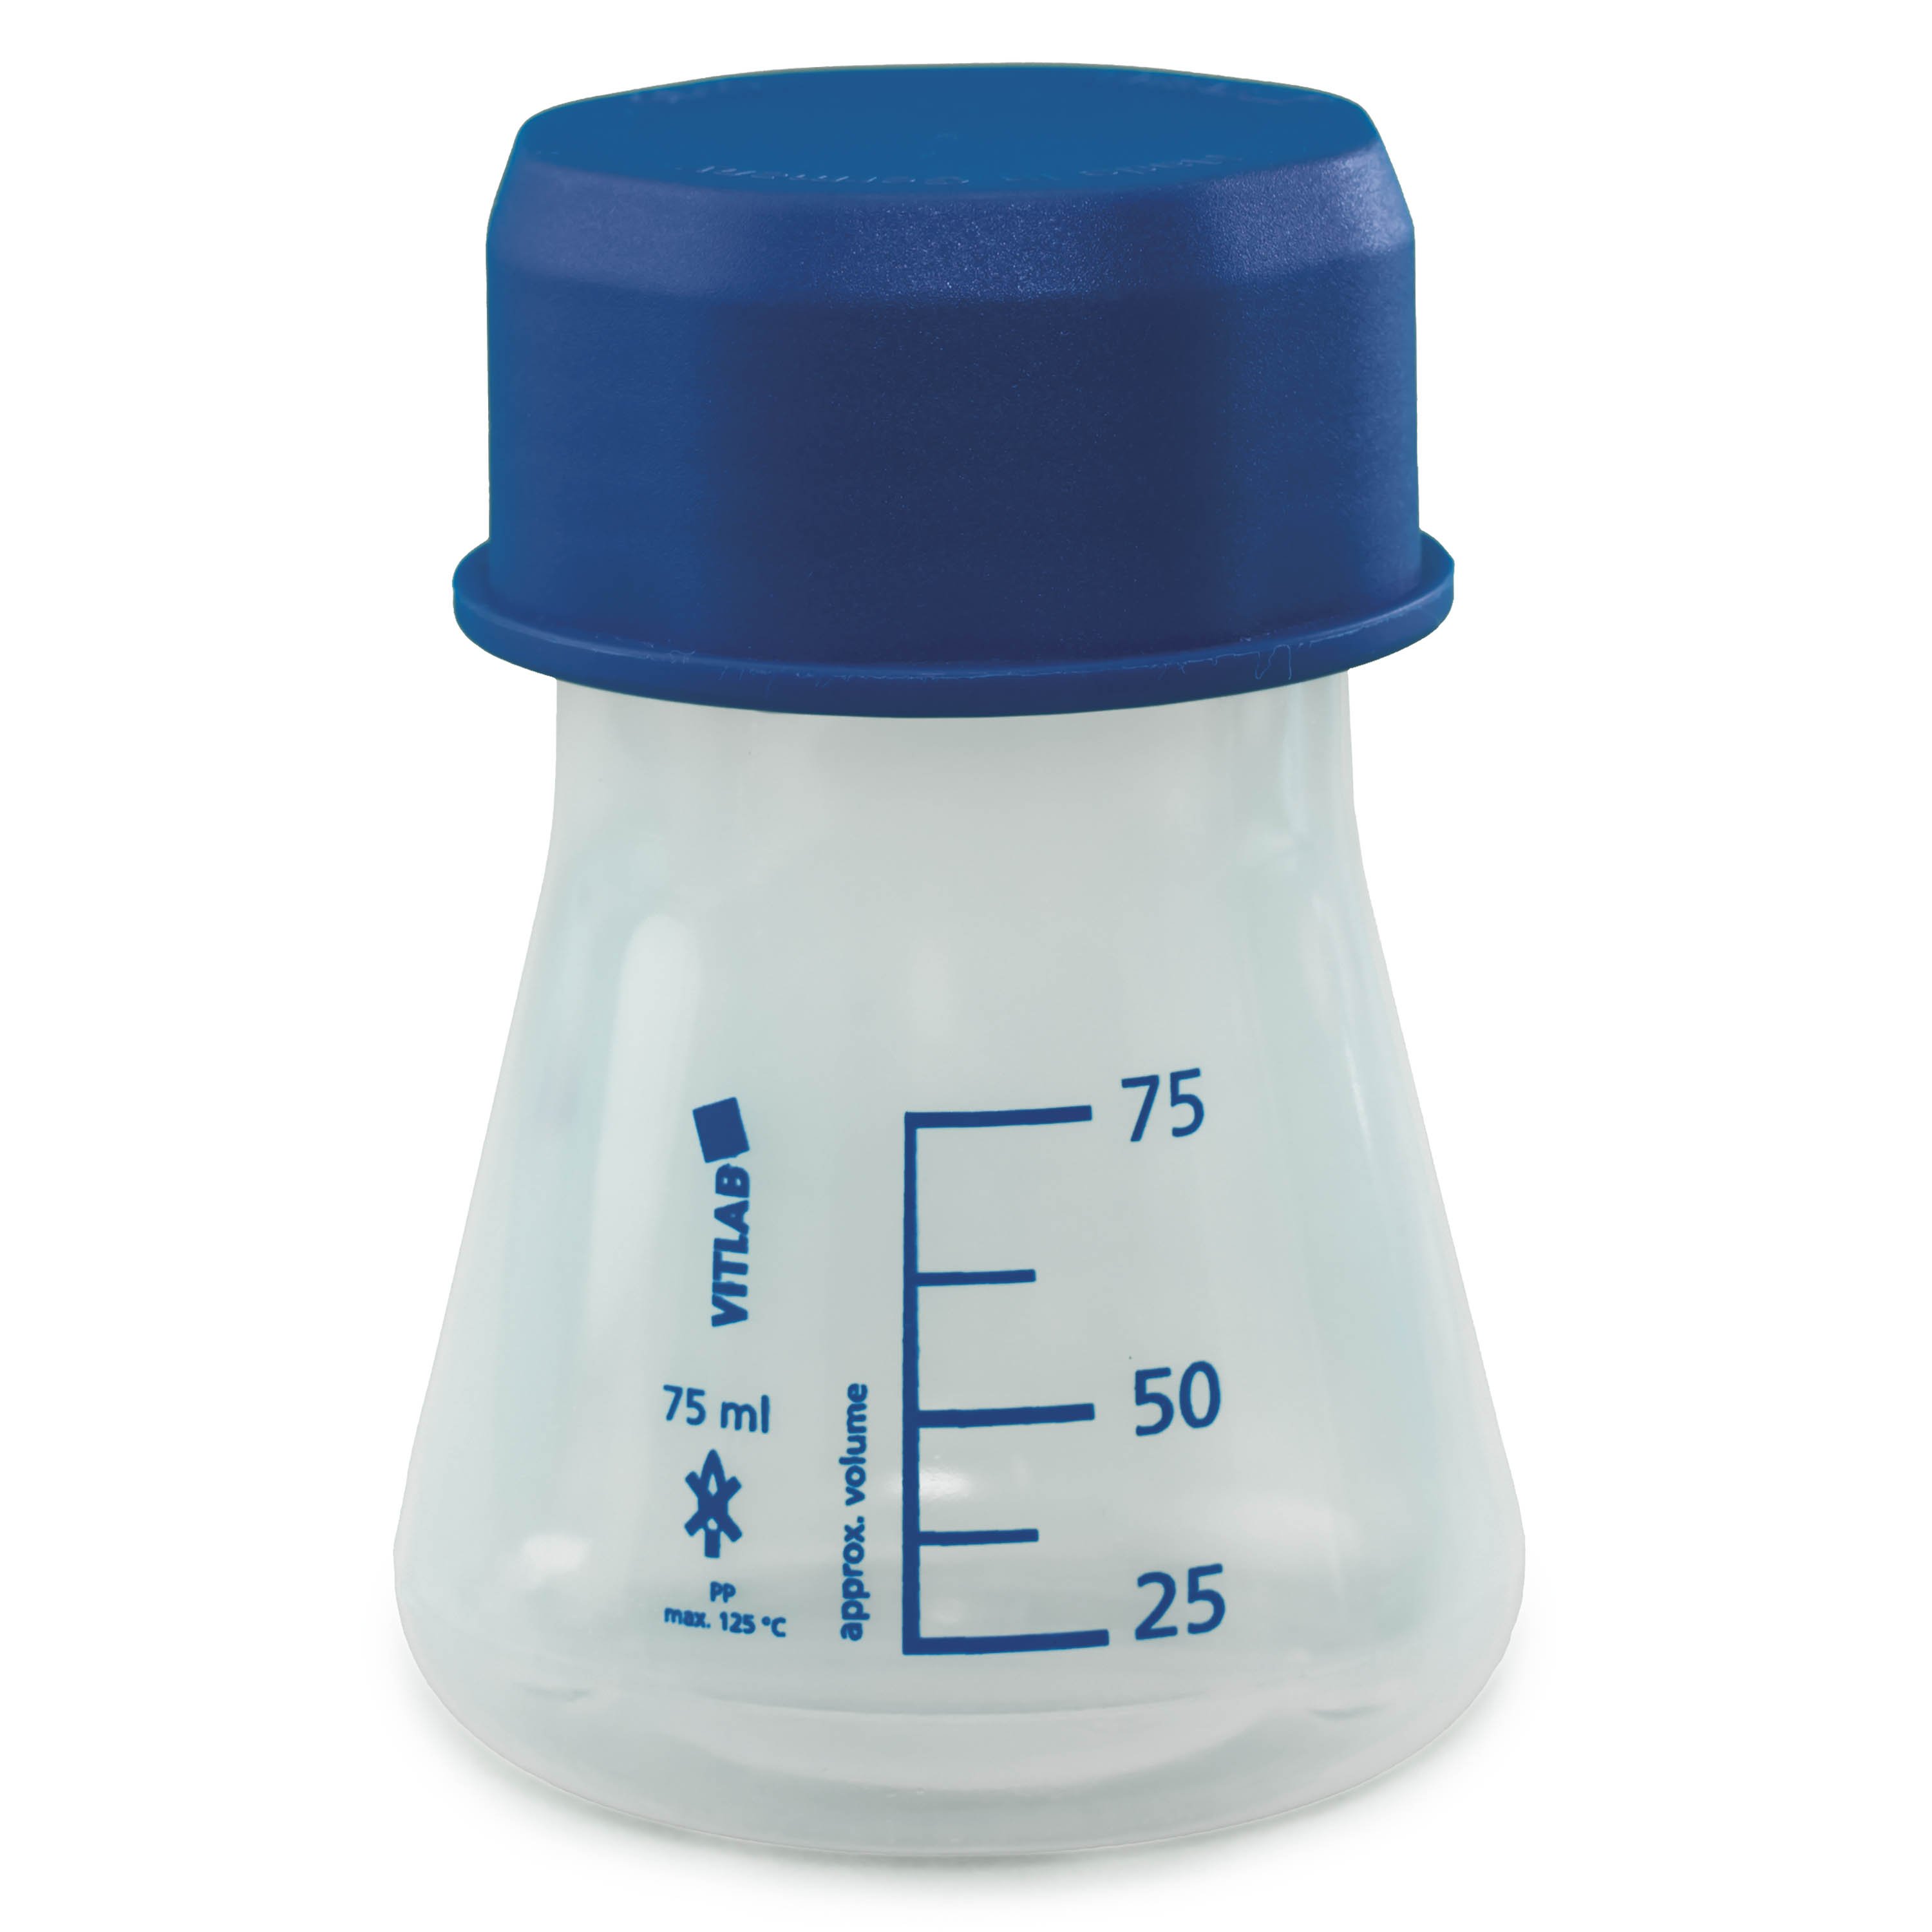 BrandTech Erlenmeyer Flasks (PP) with Screw Caps (PP) - 75mL (Pack of 6)